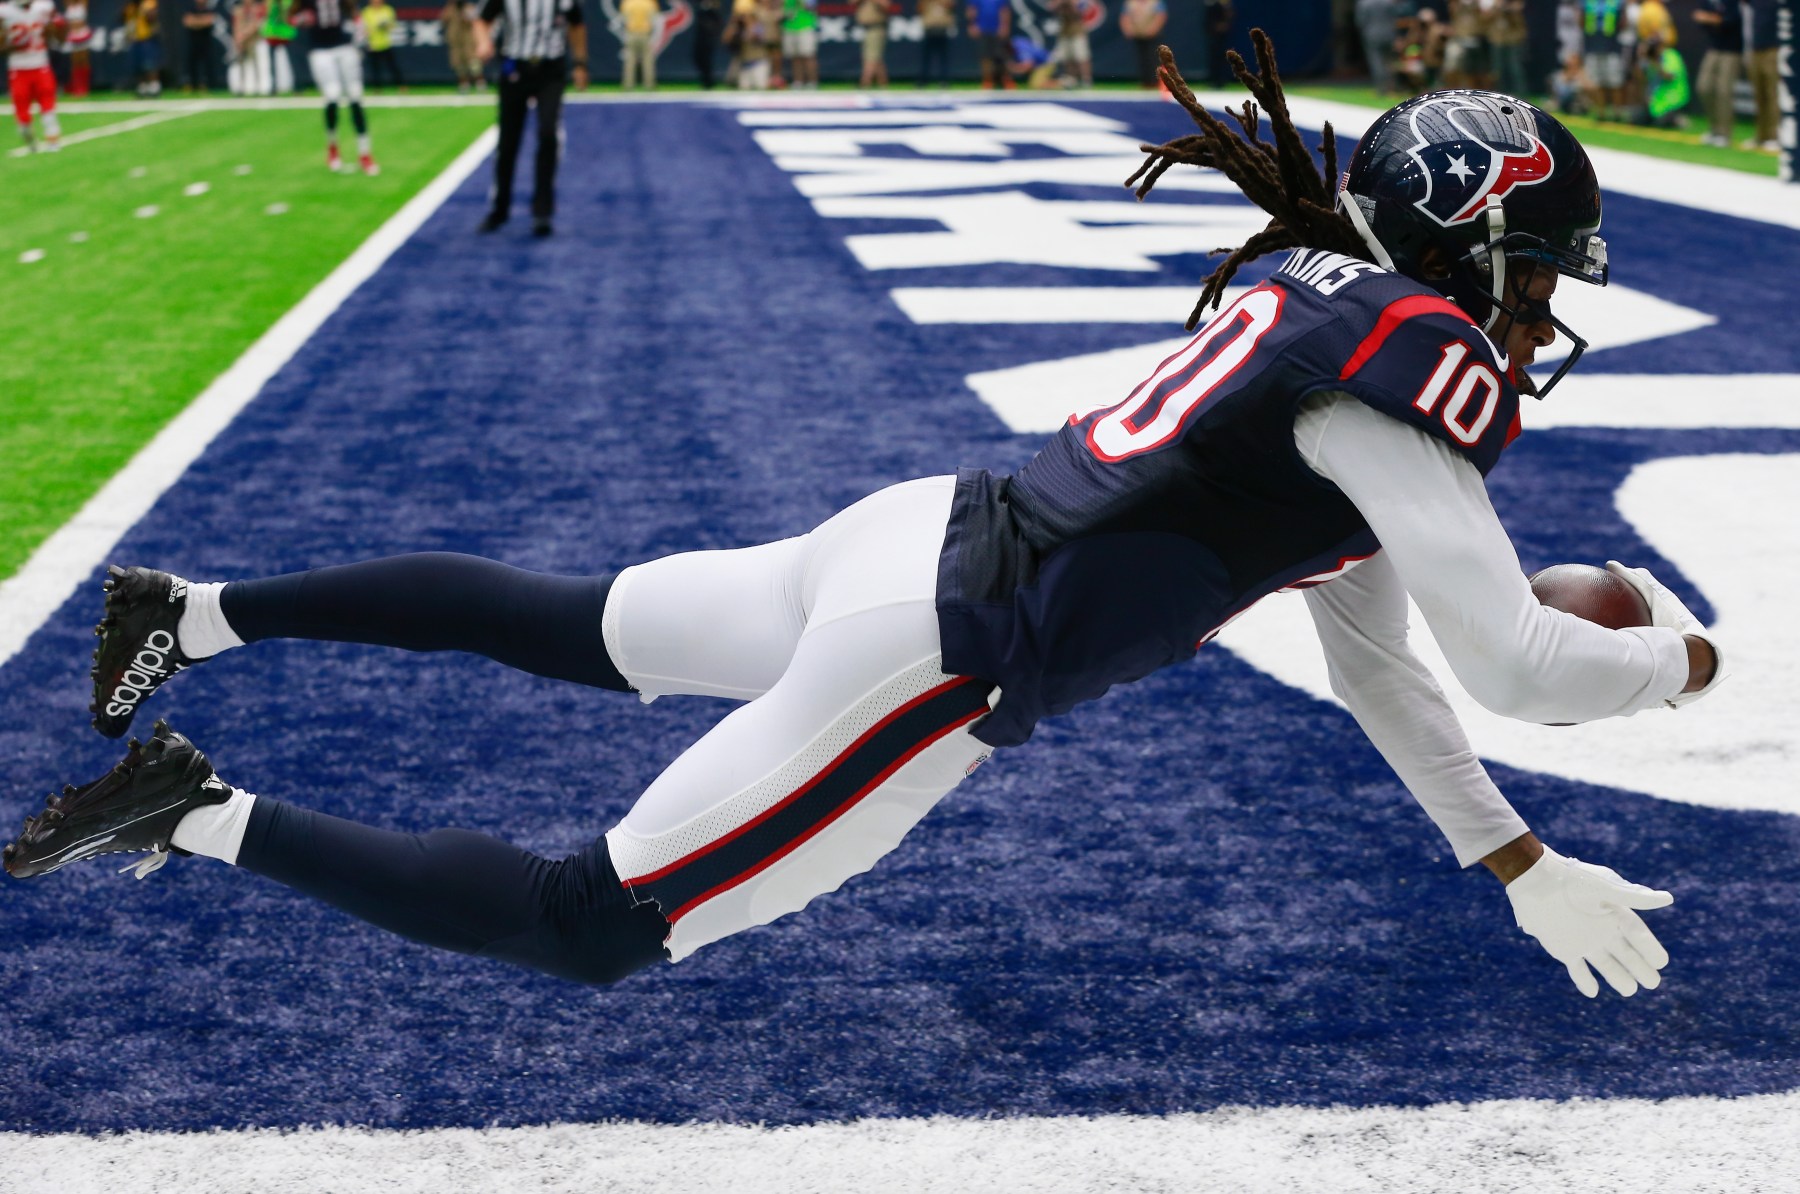 <strong>Wide Receiver – DeAndre Hopkins</strong><br>“DeAndre Hopkins belongs right at the top of this list at wide receiver,” Edlow says. “He has been spectacular with Deshaun Watson, but he also produced with Tom Savage and with Brock Osweiler. He's a down-the-field threat. He's a possession receiver. He's the perfect receiver that can get you points regardless of the quarterback. So I have no issue with Hopkins here at all. He belongs here.”